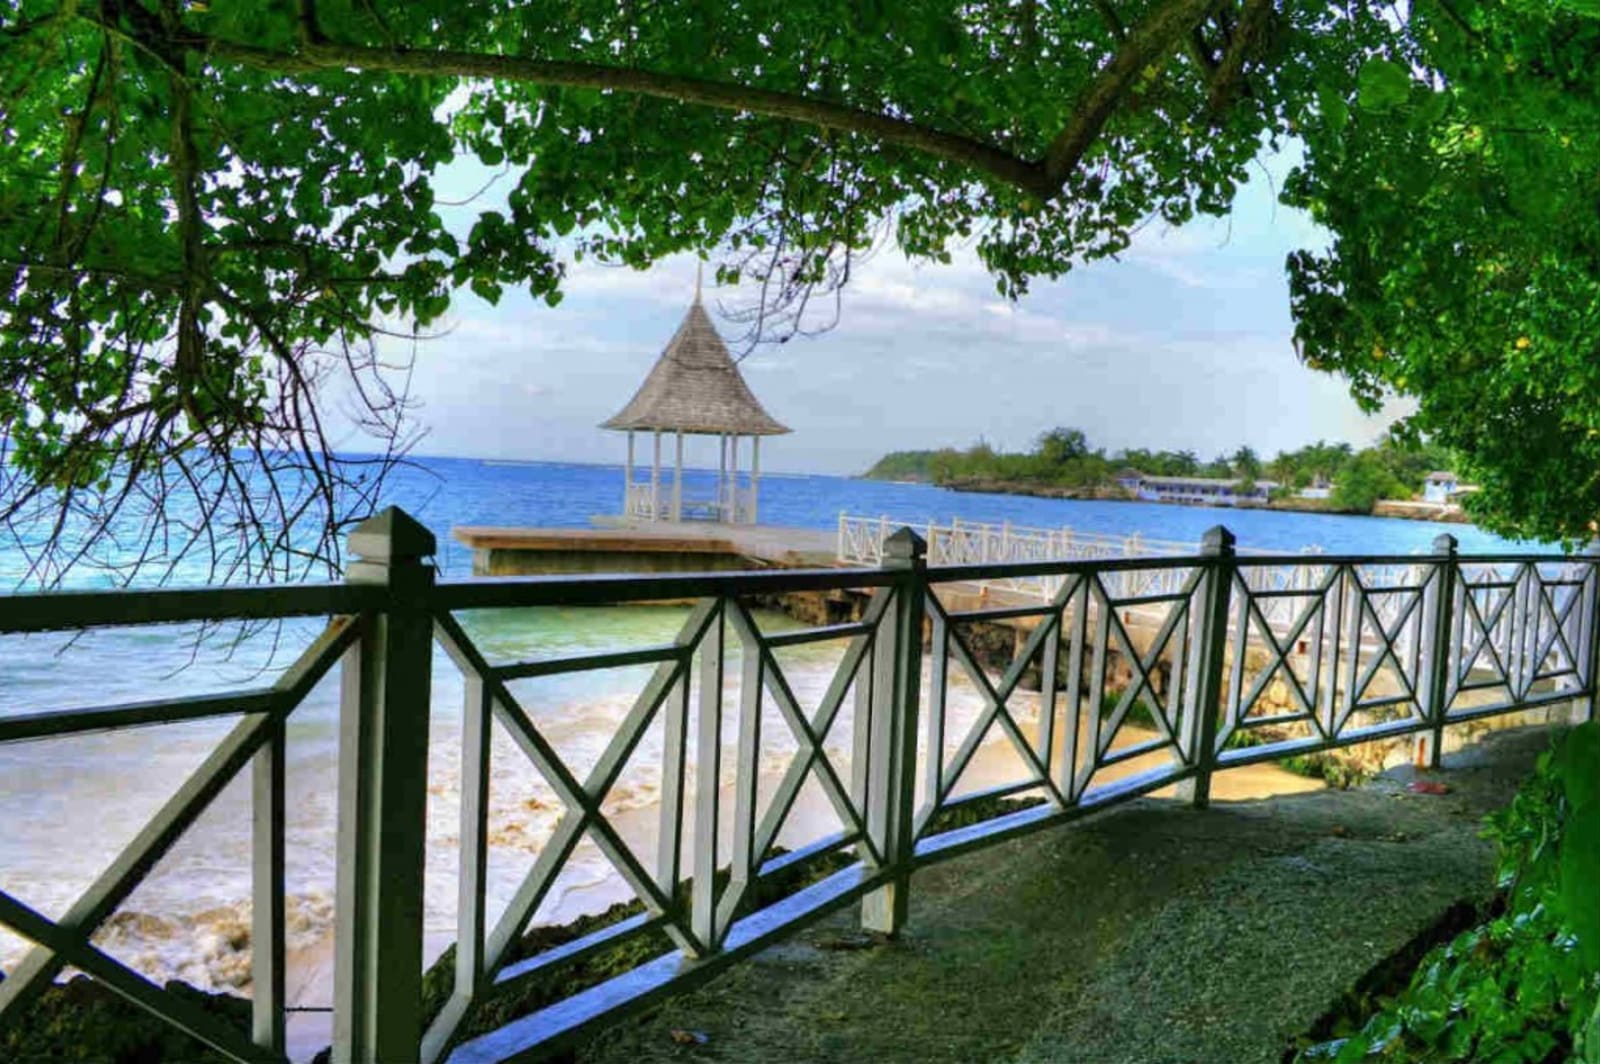 Small gazebo on a pier lined with white square walls